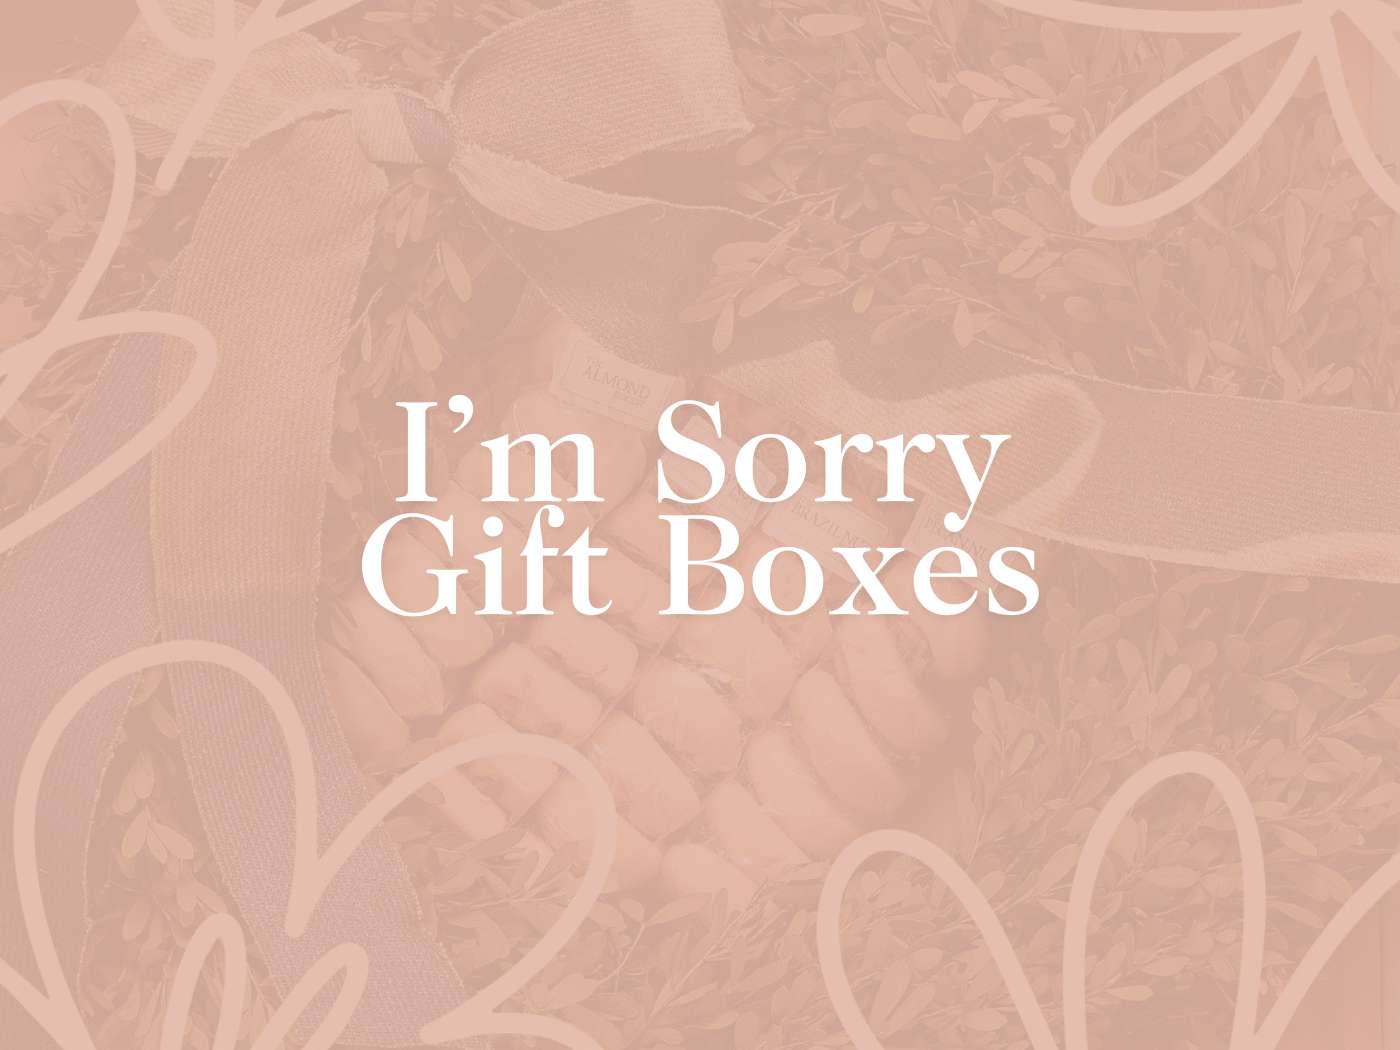 Elegant gift box tied with a pink ribbon, nestled among soft floral accents, representing a heartfelt gesture of apology. Part of the I'm Sorry Gift Boxes Apology Gifts Collection from Fabulous Flowers and Gifts.